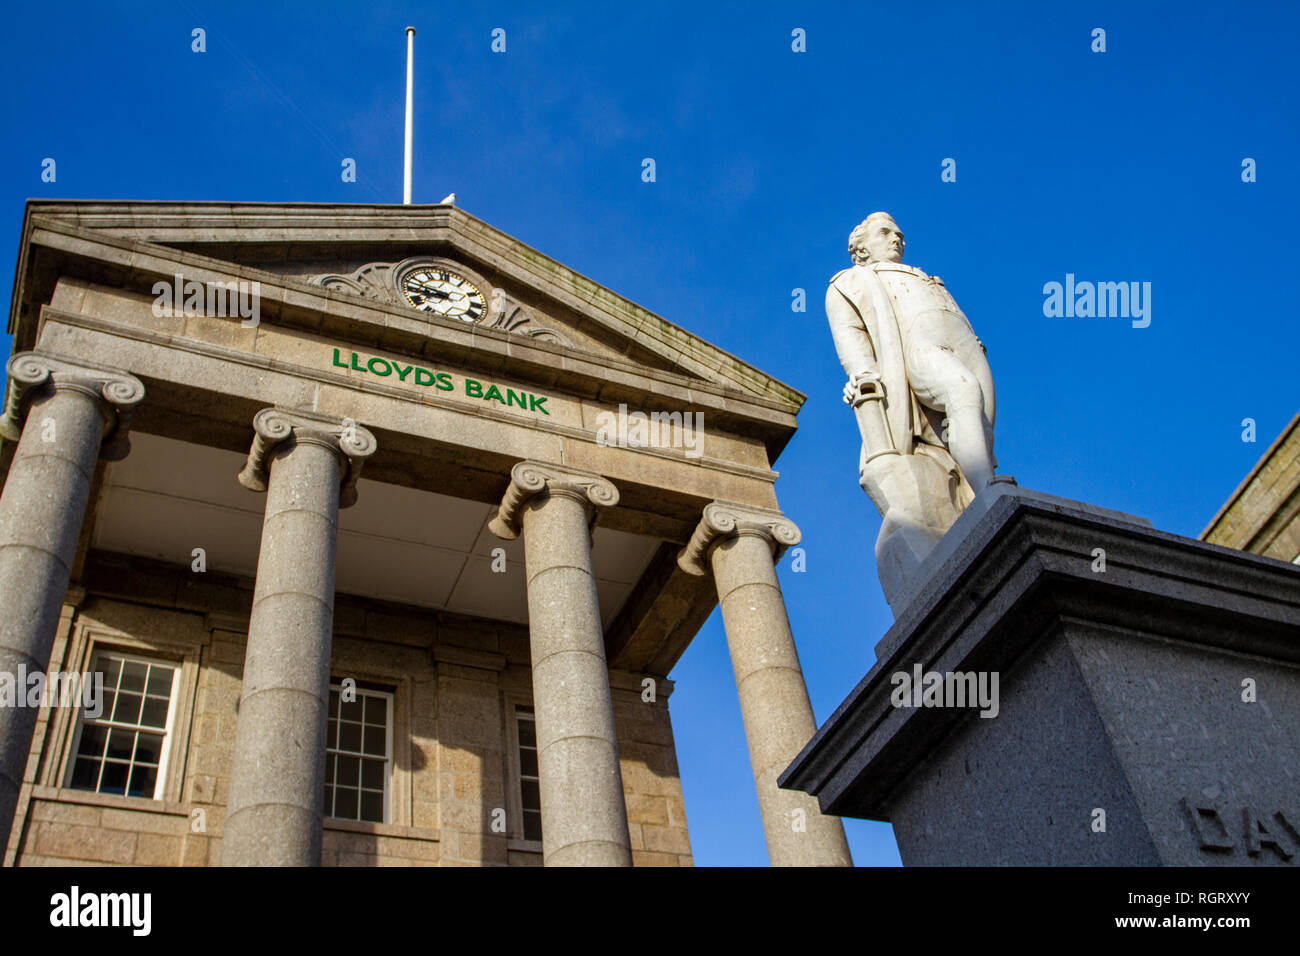 The distinctive Davy statue outside Lloyds building dome in Penzance, Cornwall, UK Stock Photo